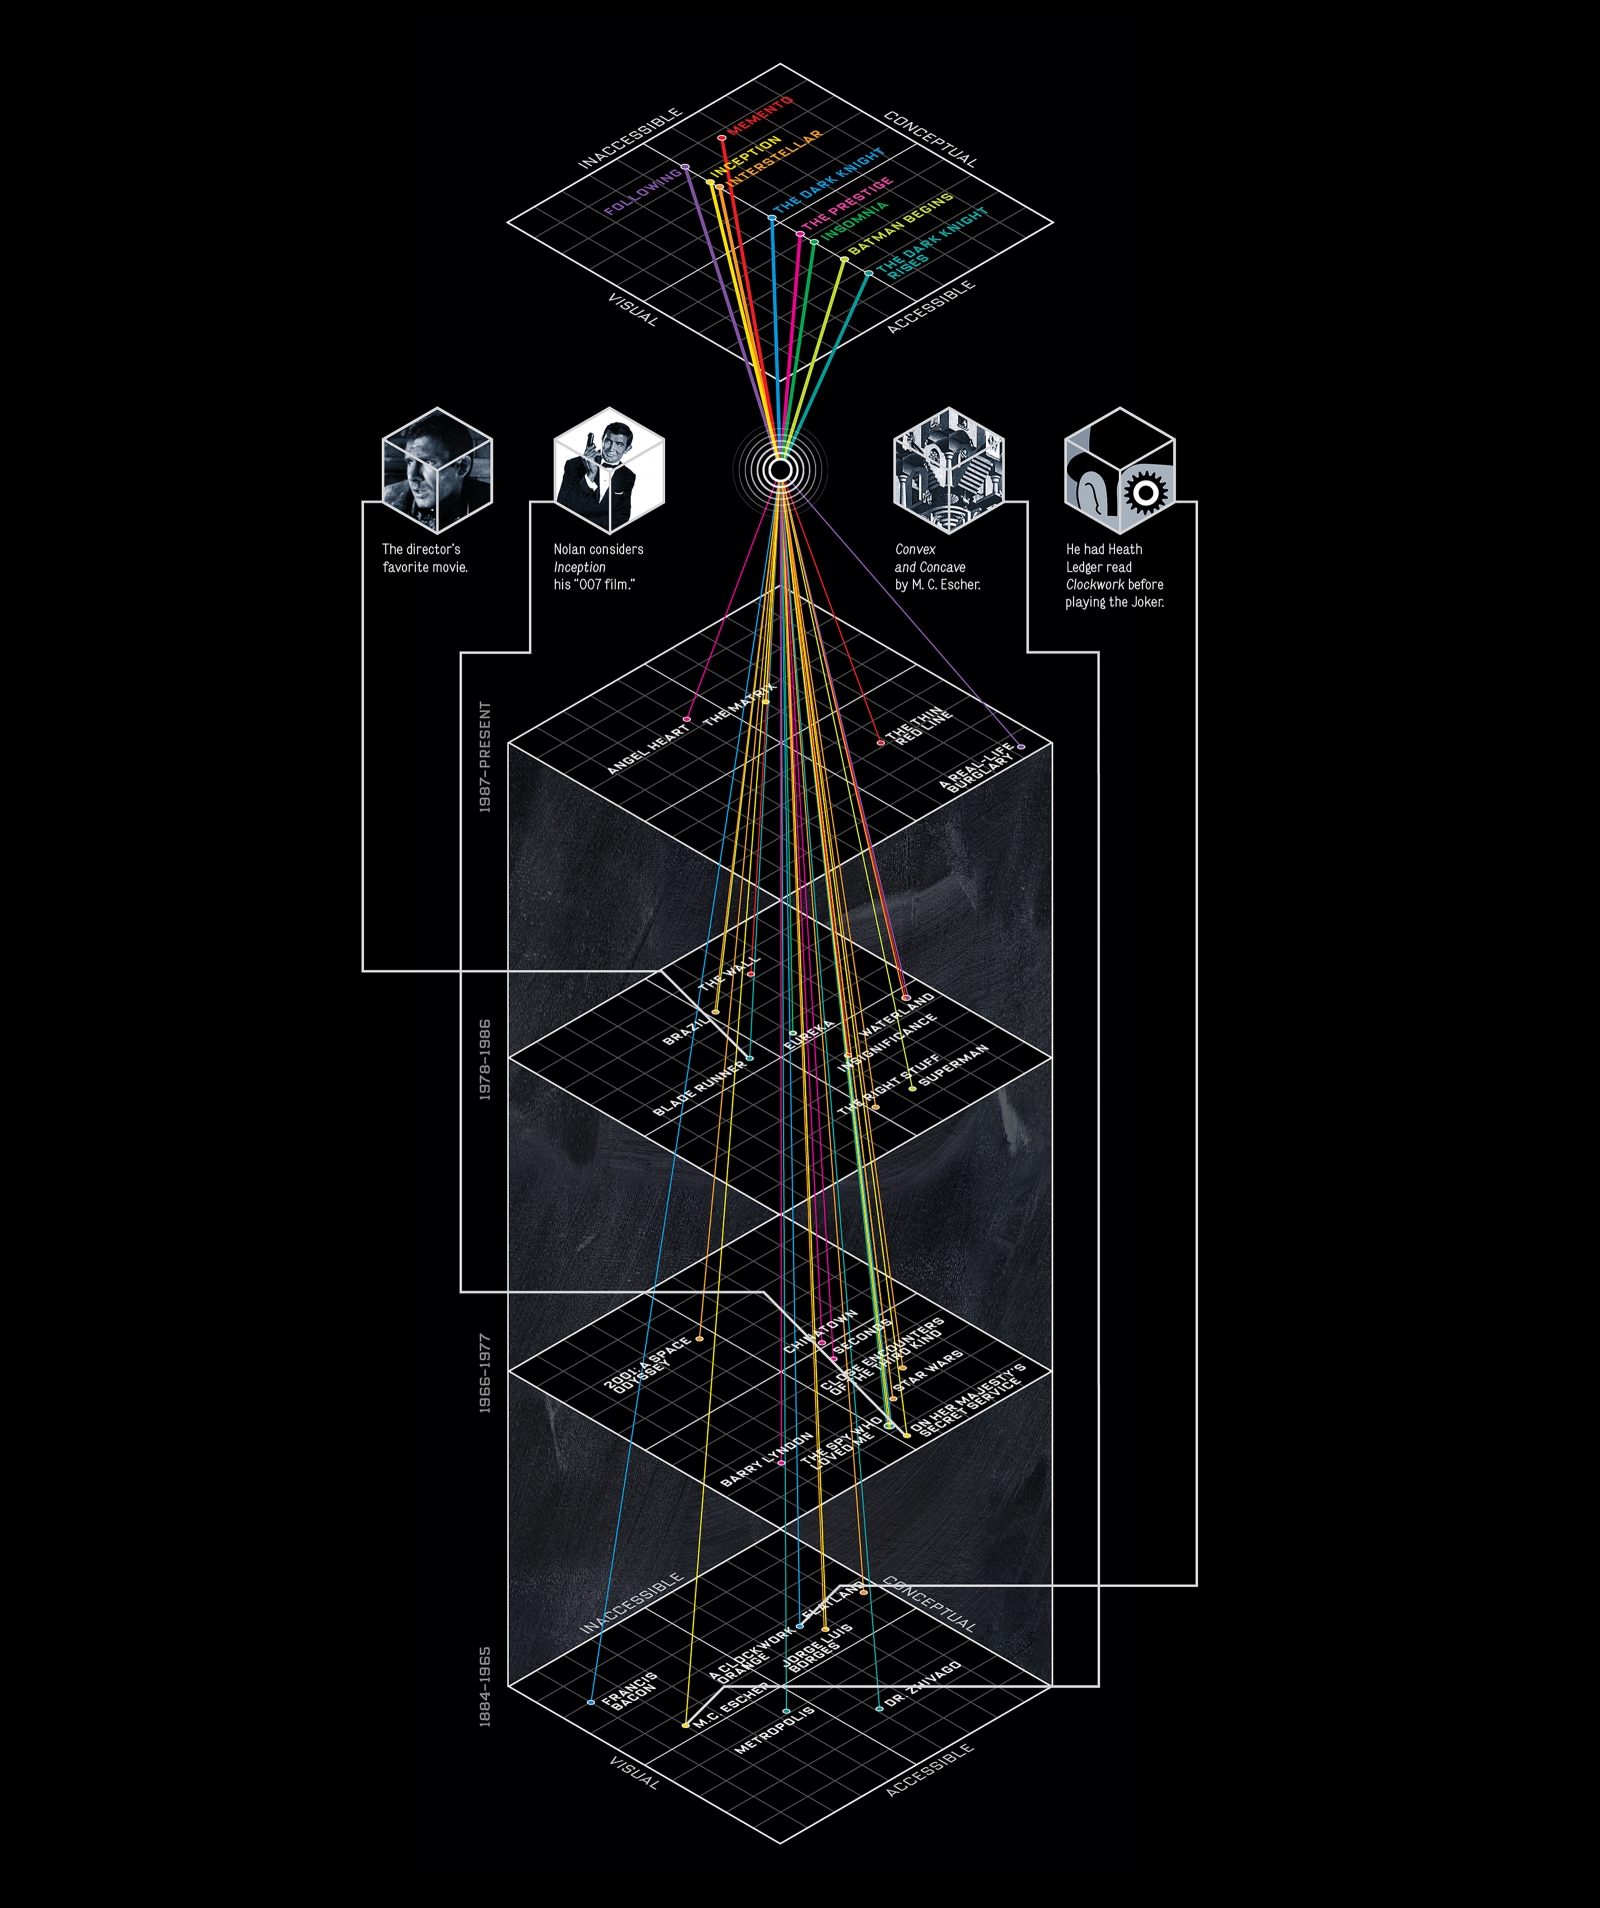 Wired Hypercube infographic of Chris Nolan director movies